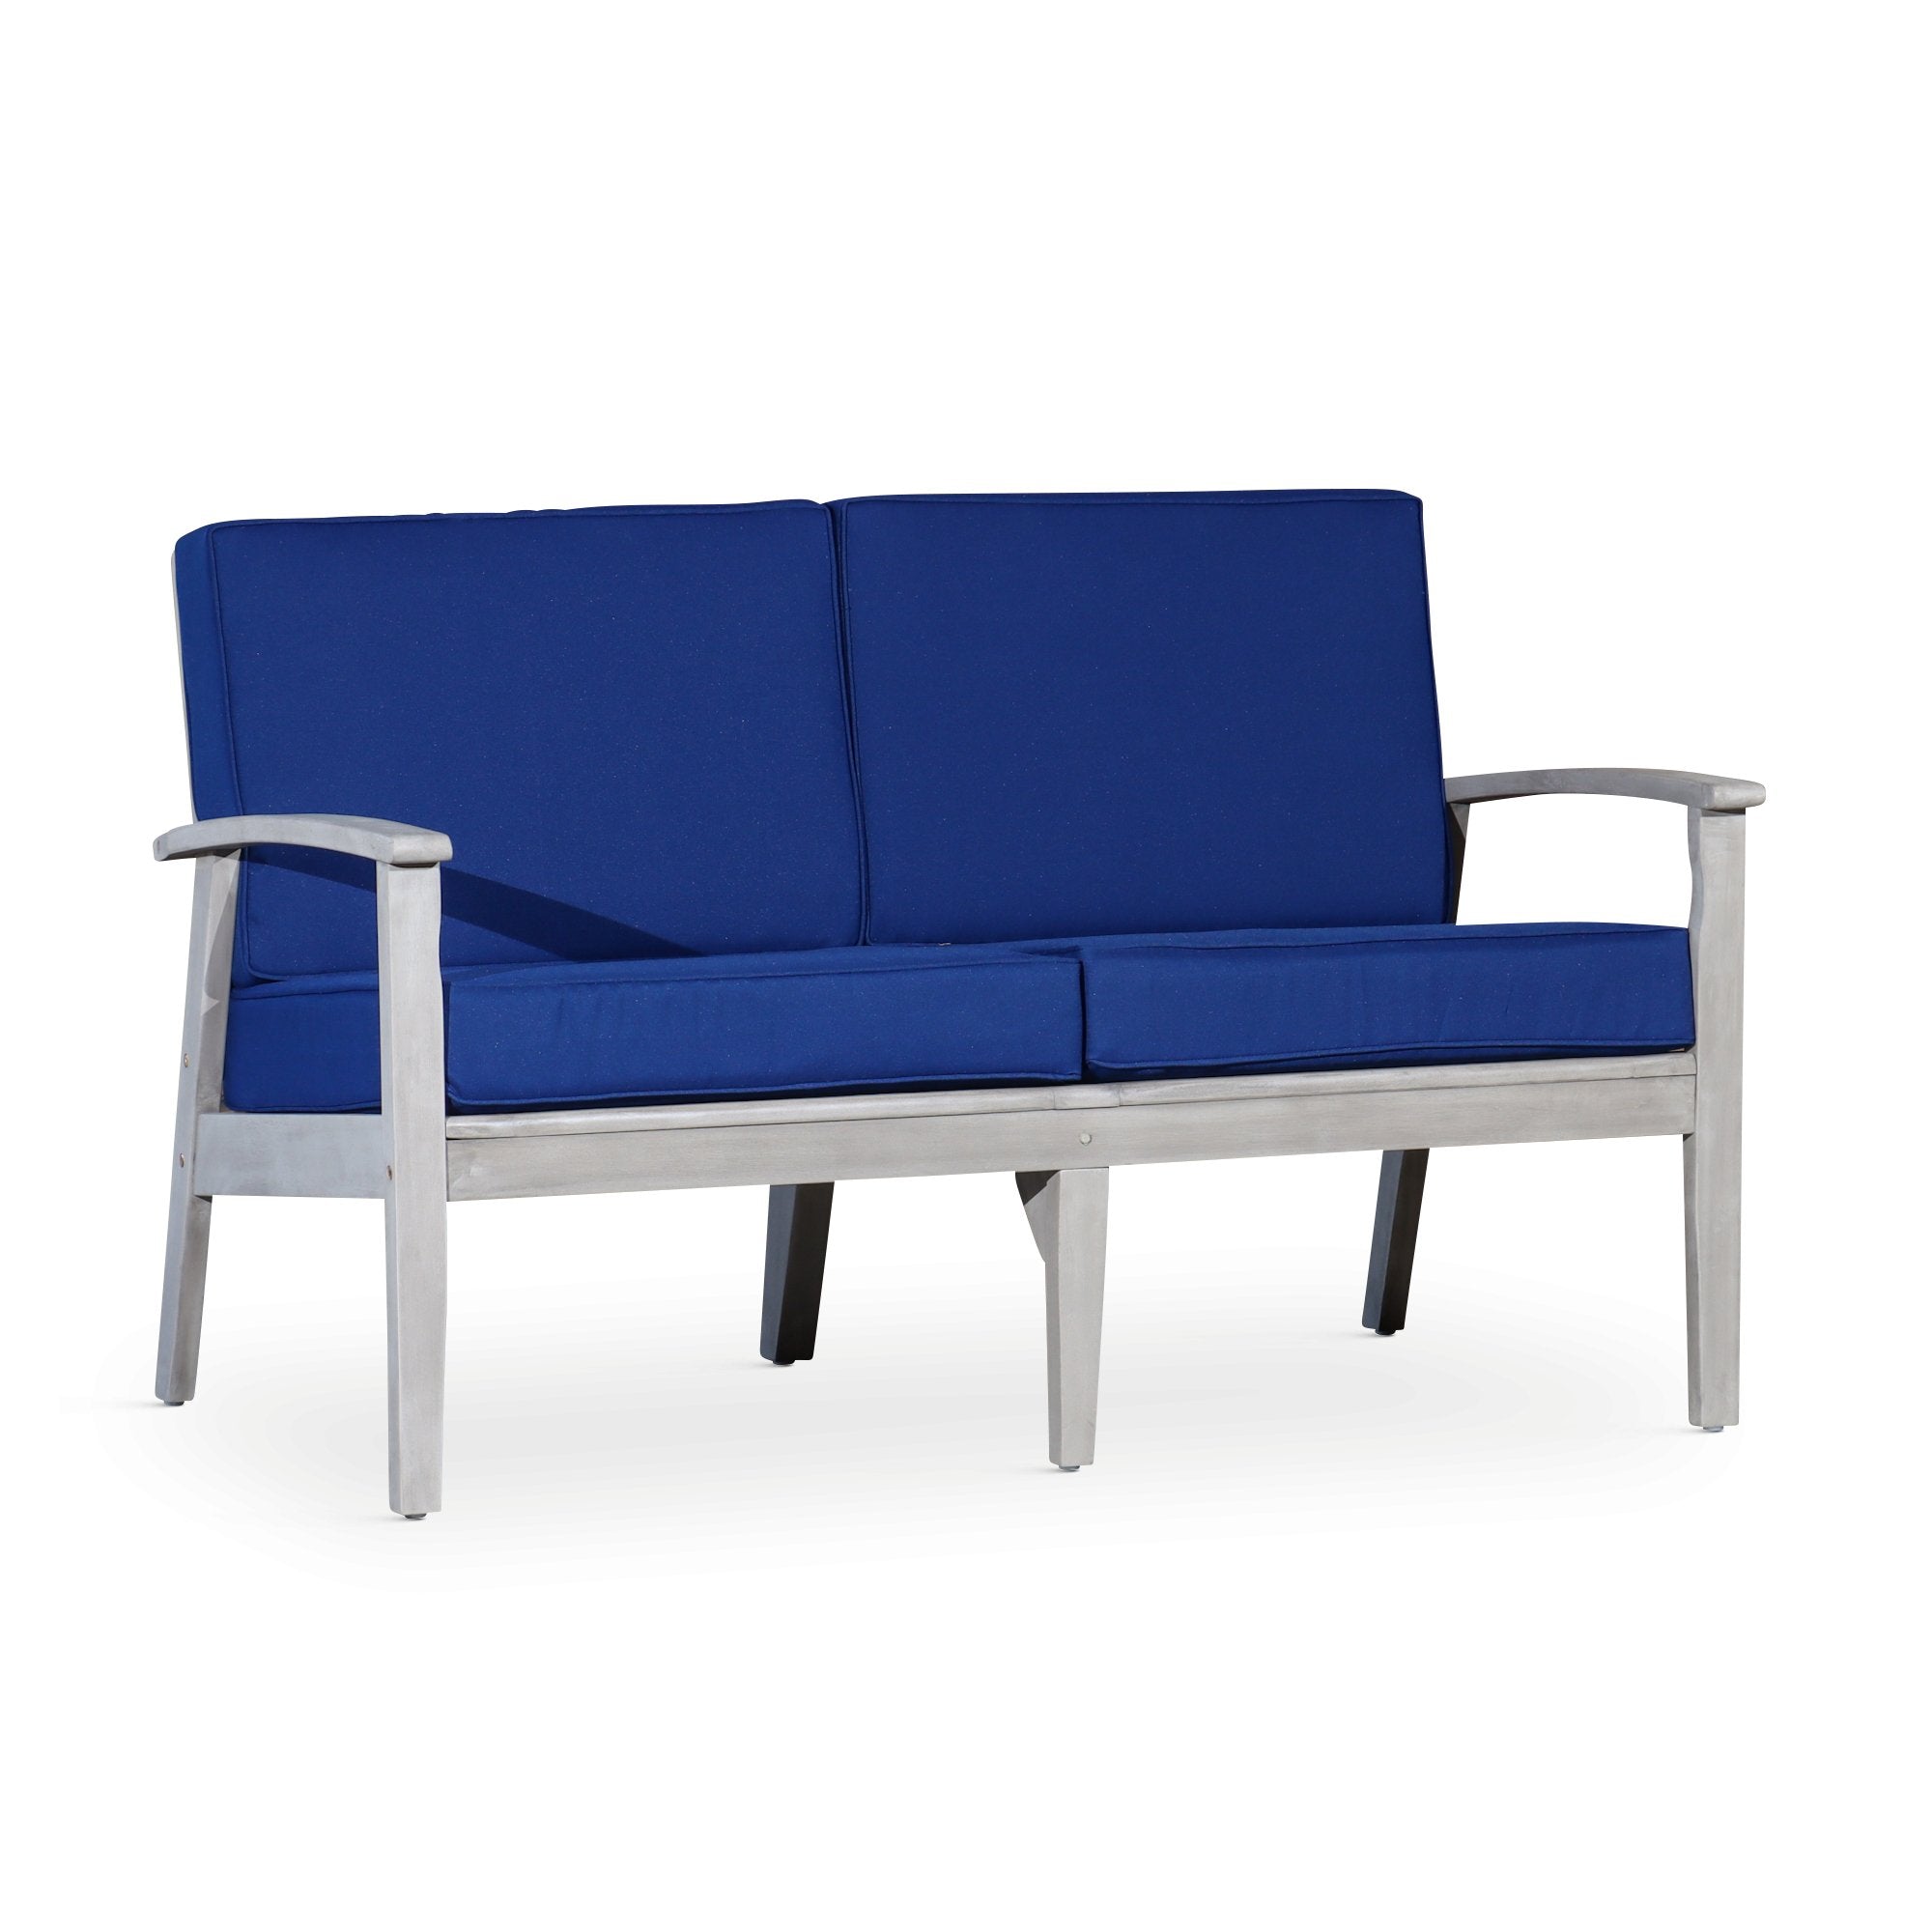 Outdoor-Loveseat-with-Cushions,-Silver-Gray-Finish,-Navy-Cushions-Outdoor-Chairs